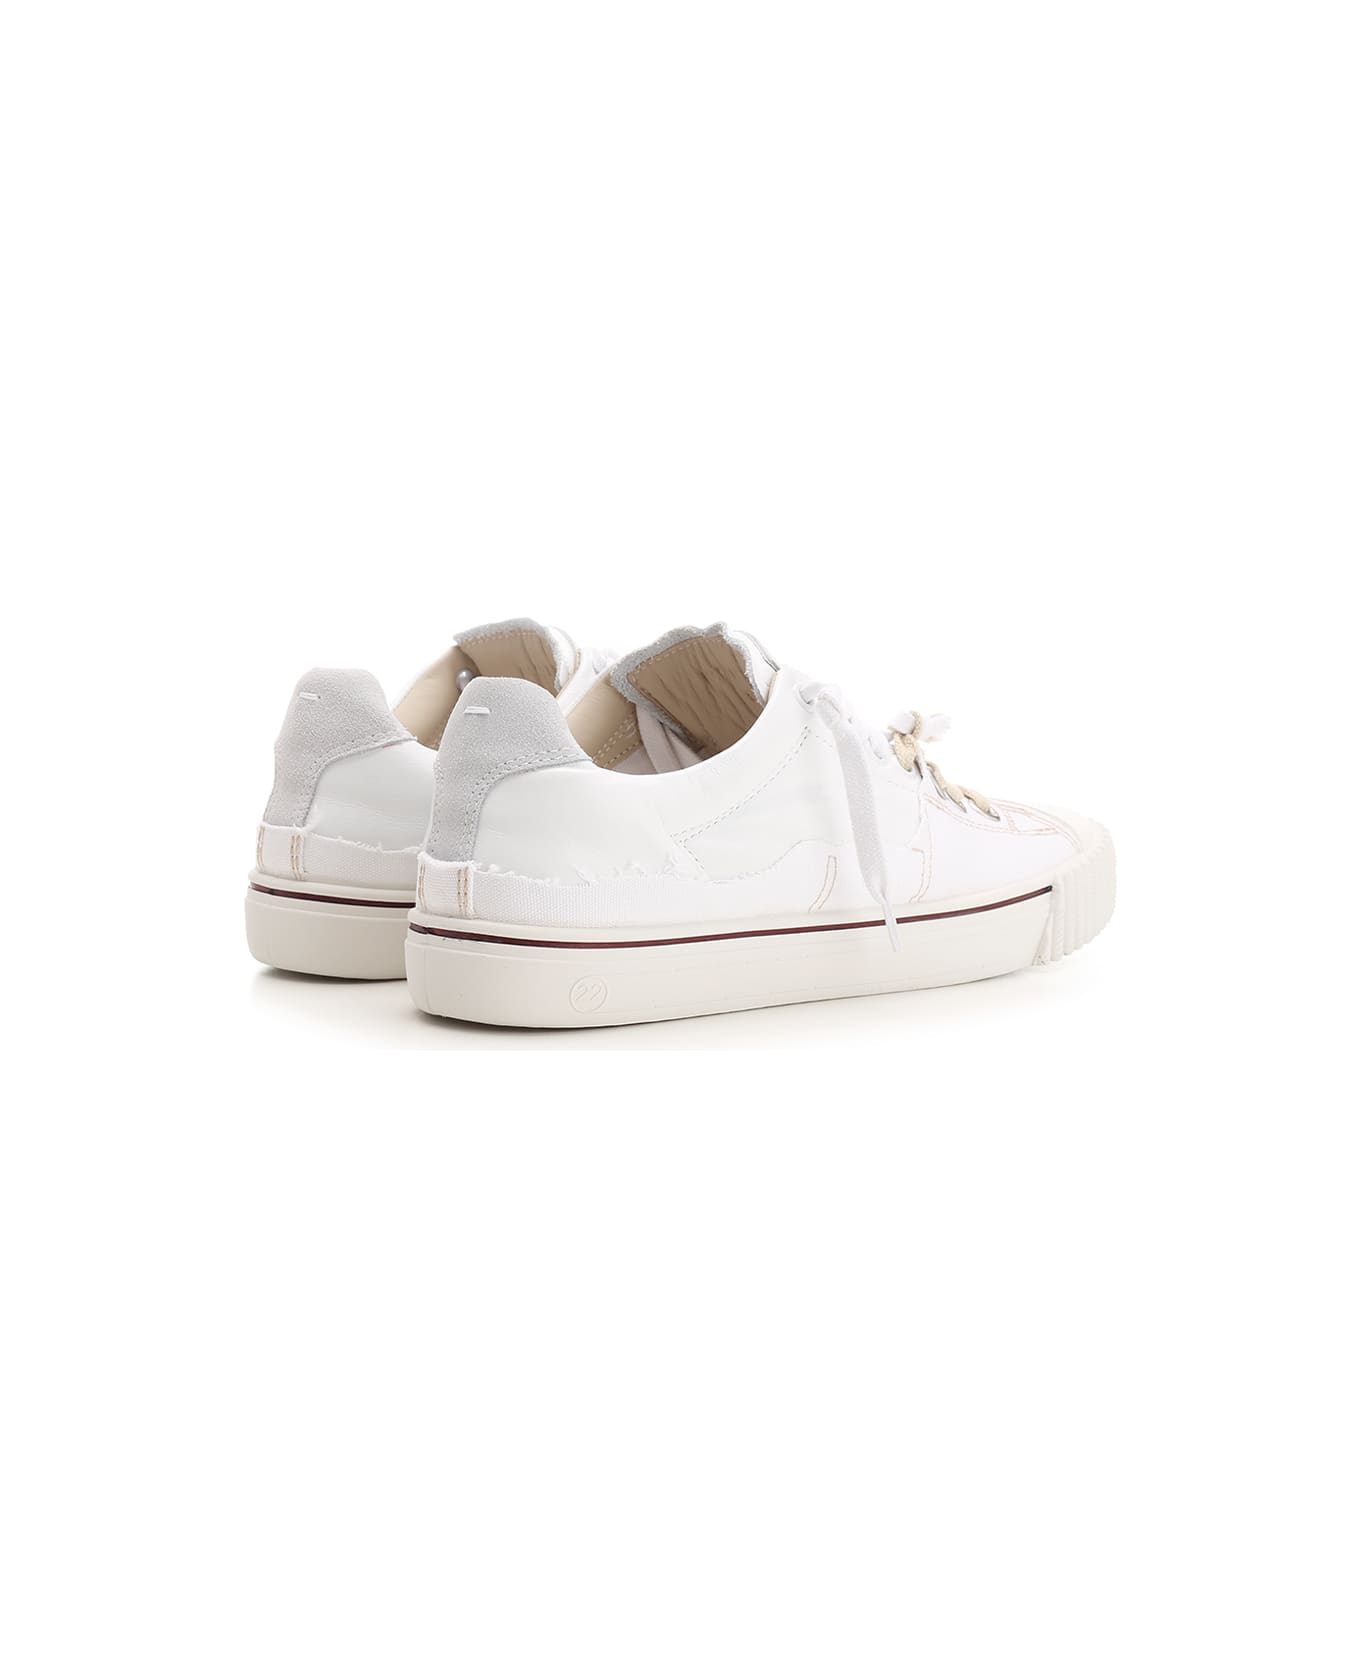 Maison Margiela Round-toe Lace-up Sneakers - White スニーカー